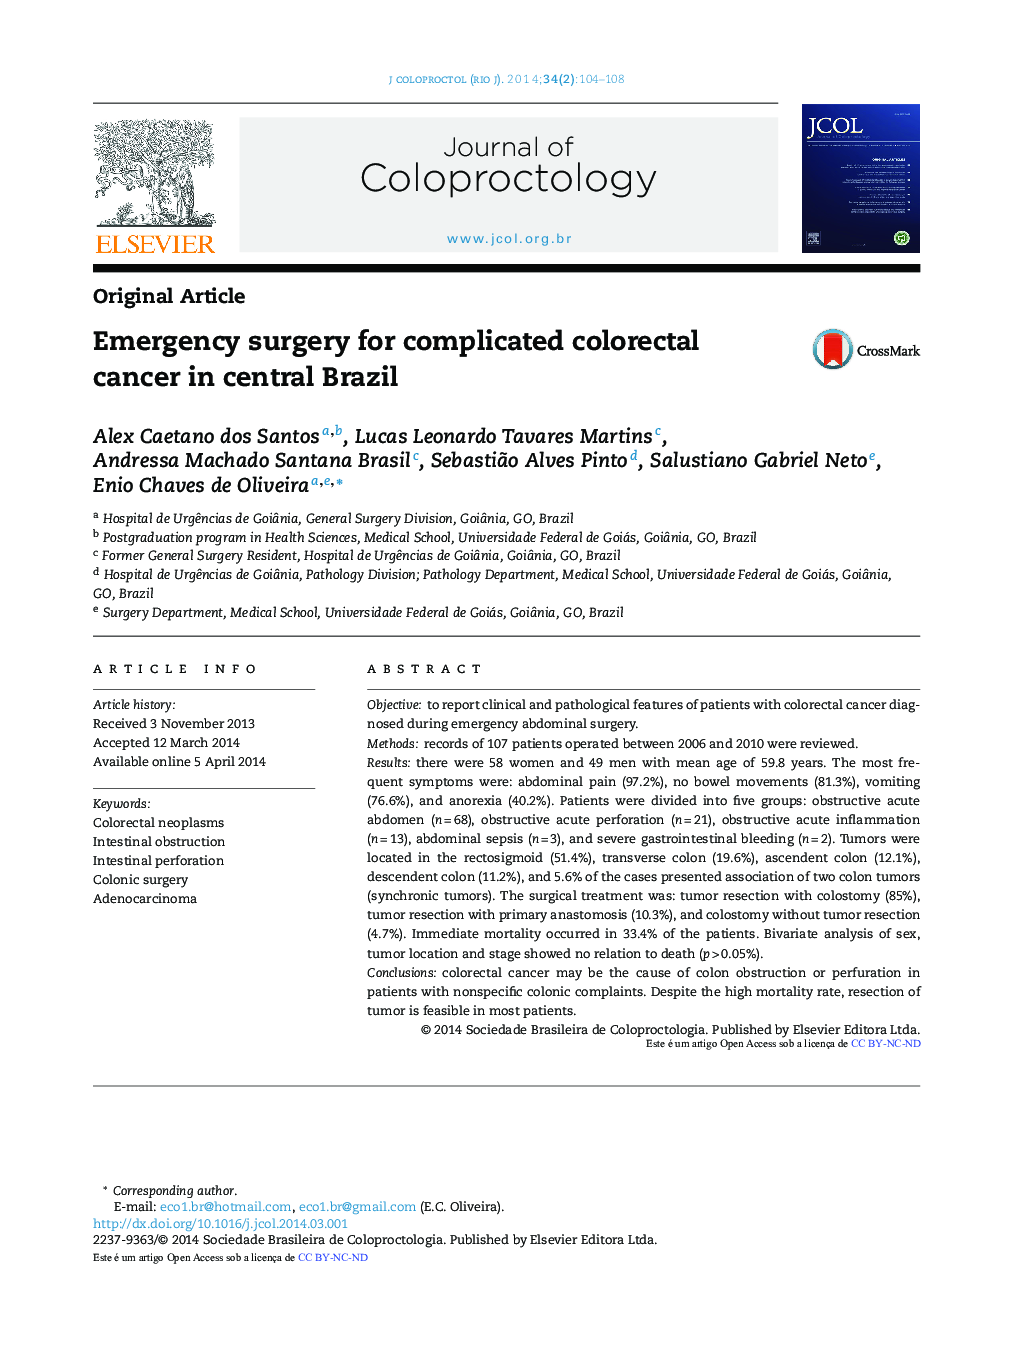 Emergency surgery for complicated colorectal cancer in central Brazil